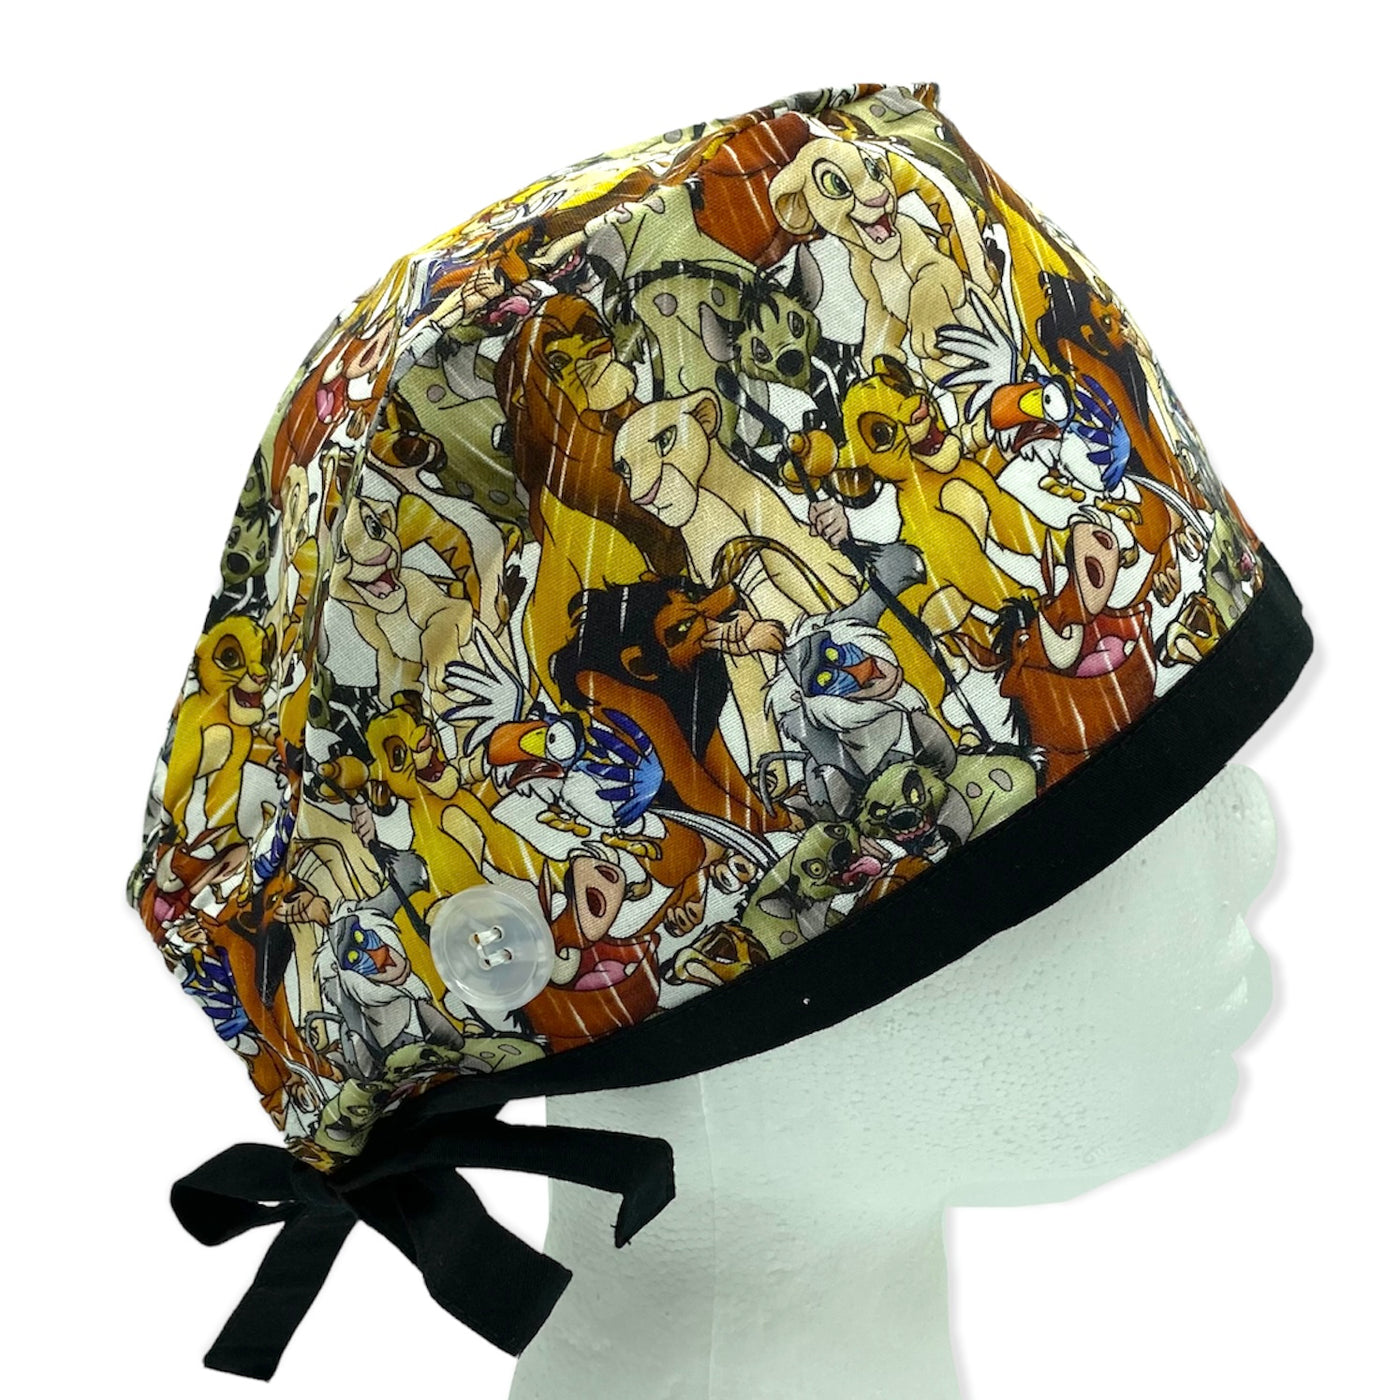 lion king disney surgical scrub cap with ear buttons and satin lining. Best unisex scrub hats